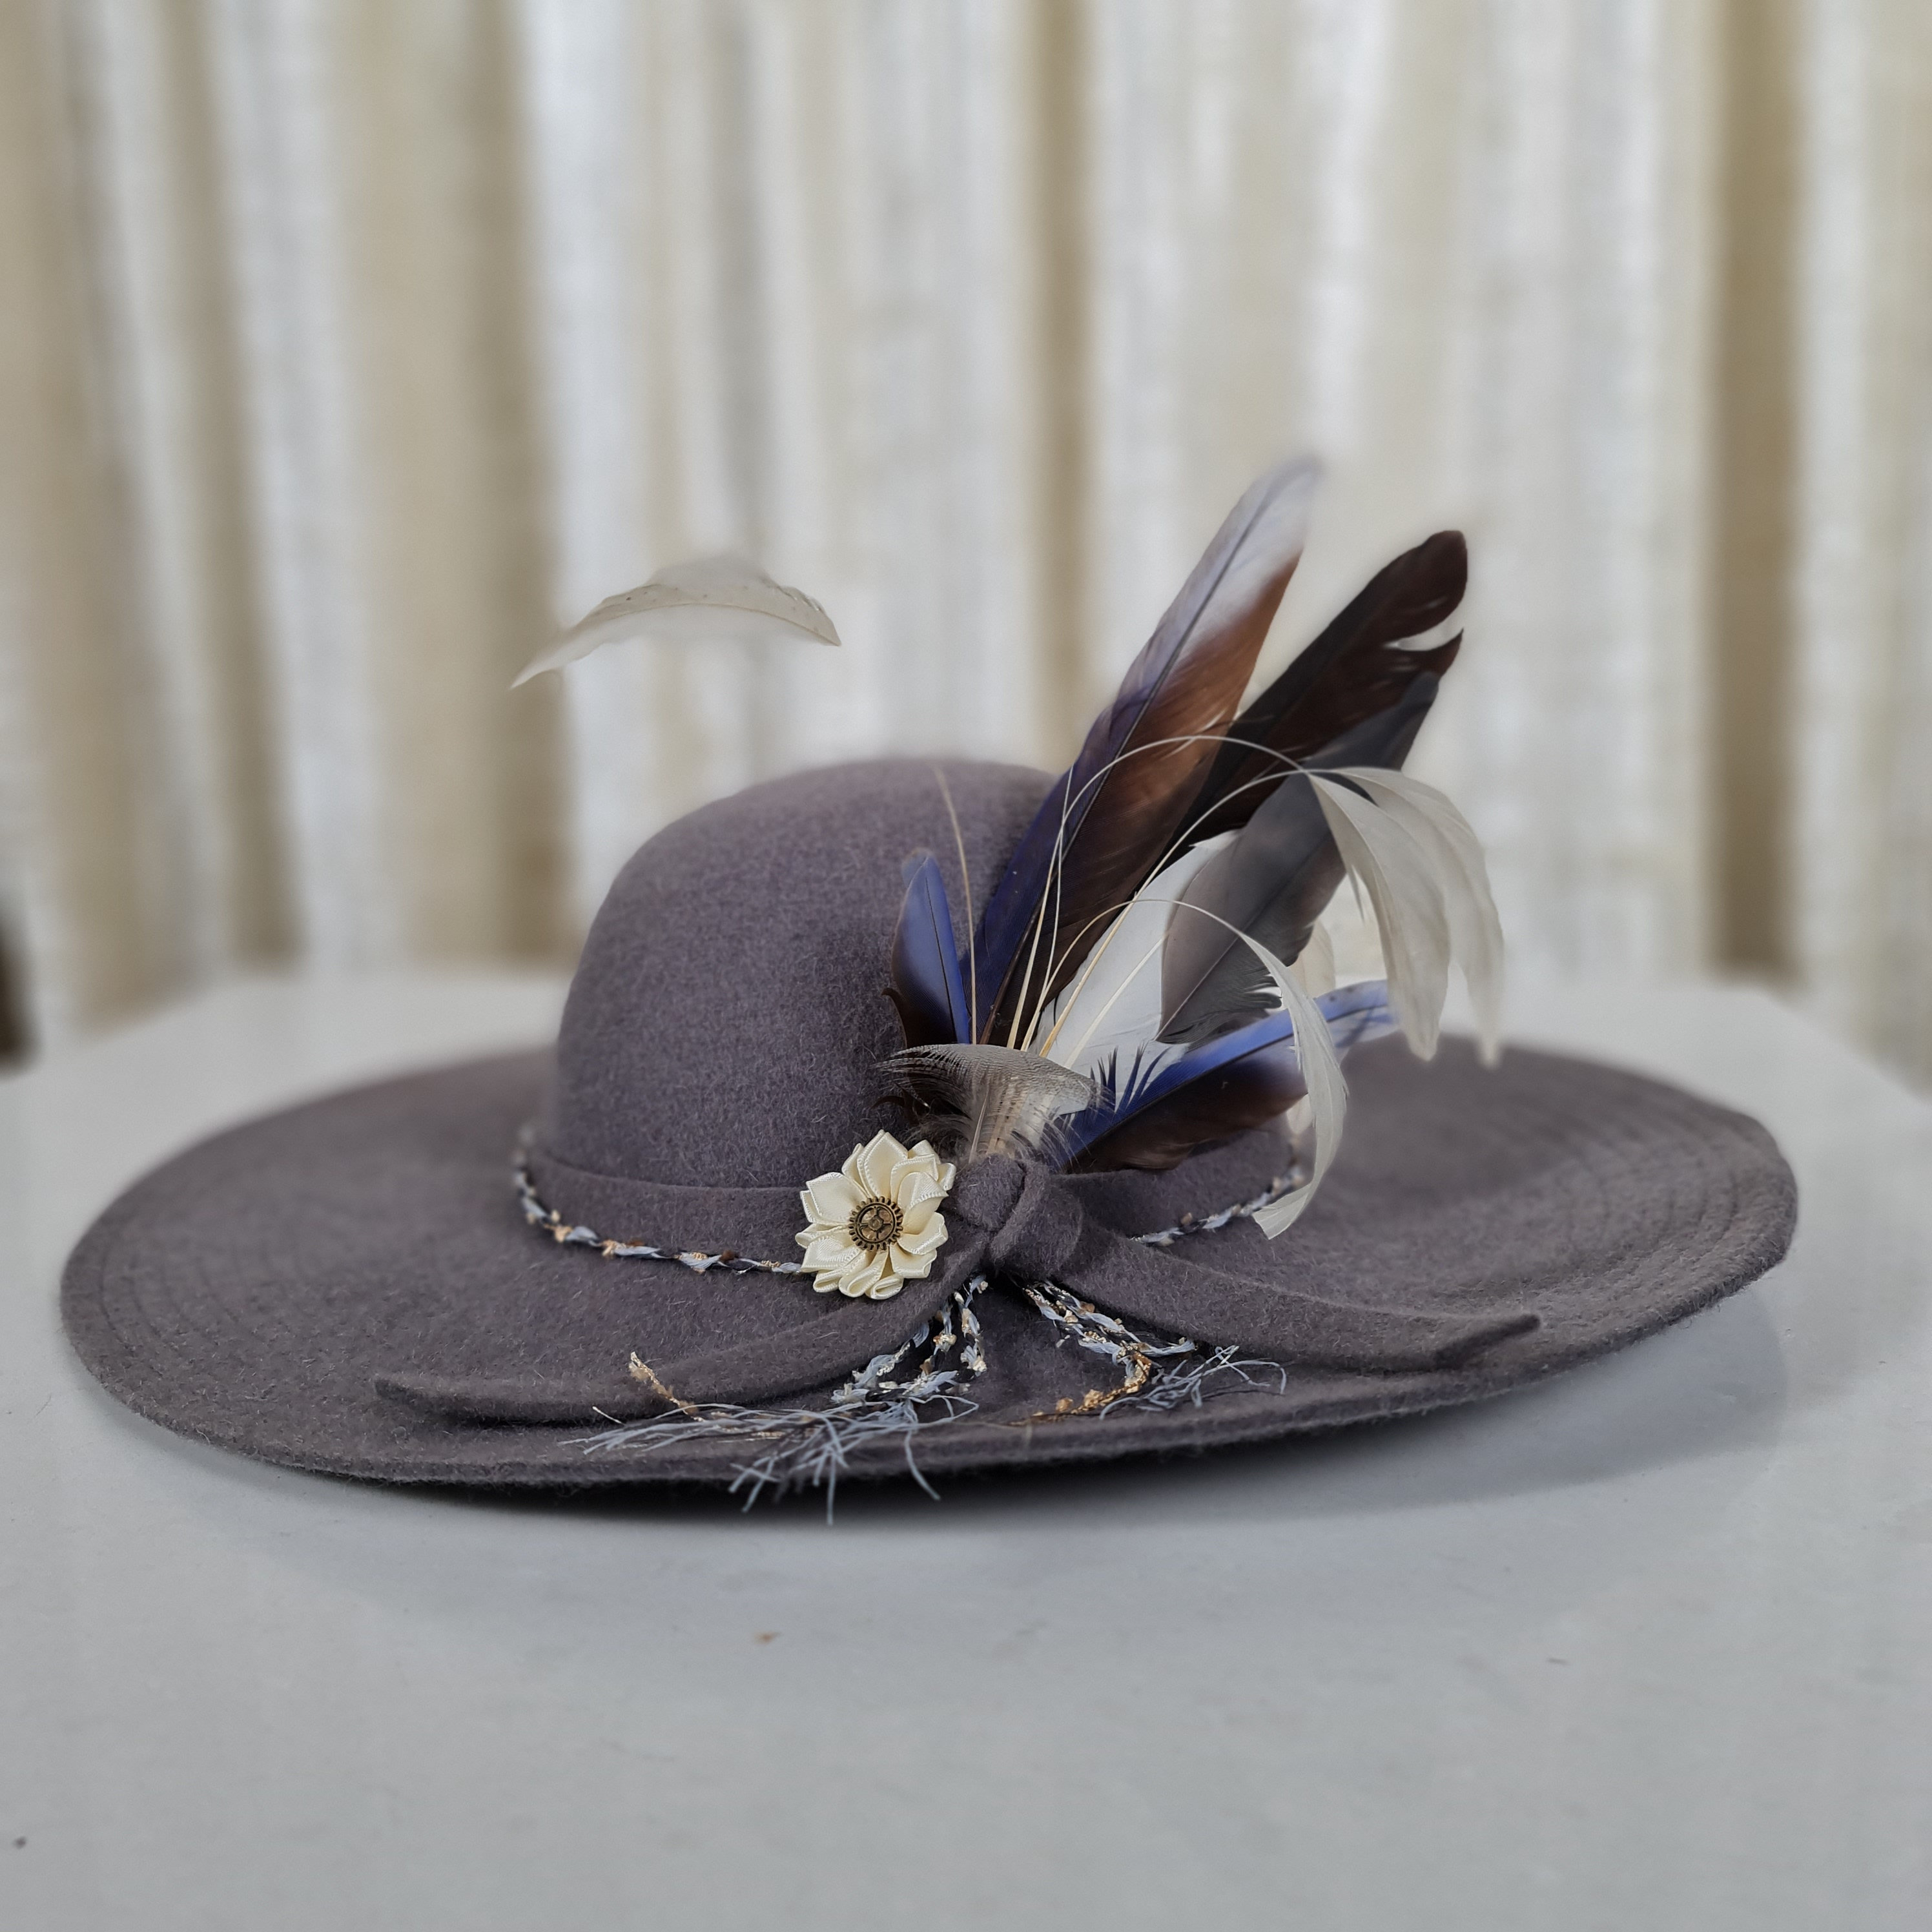 Royal Blue Fedora With Feathers 